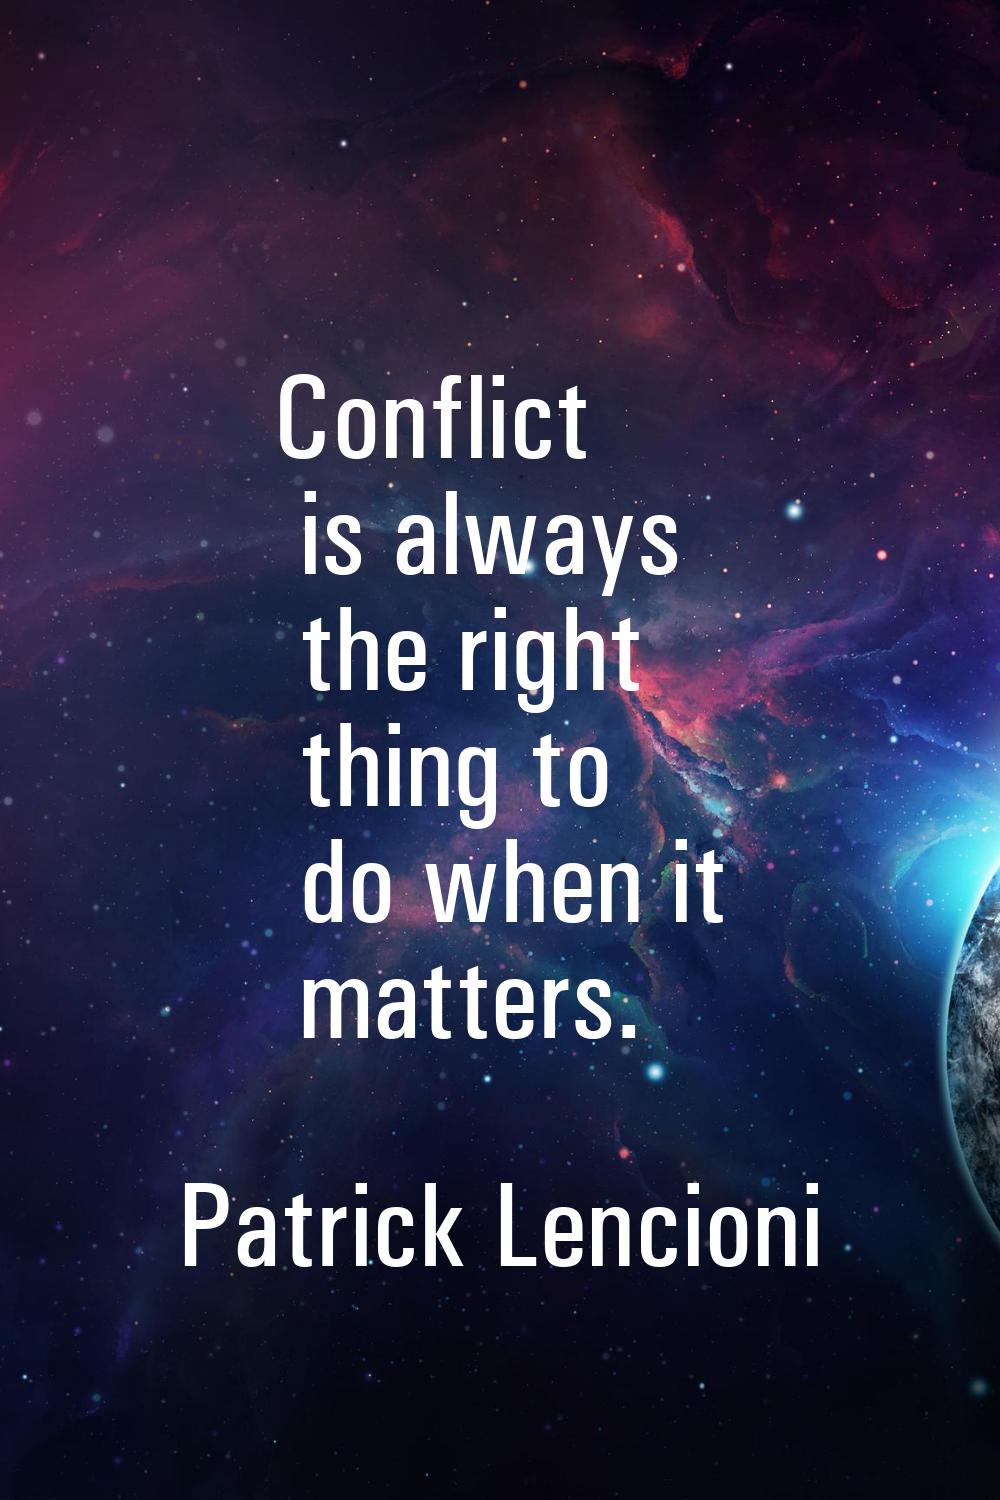 Conflict is always the right thing to do when it matters.